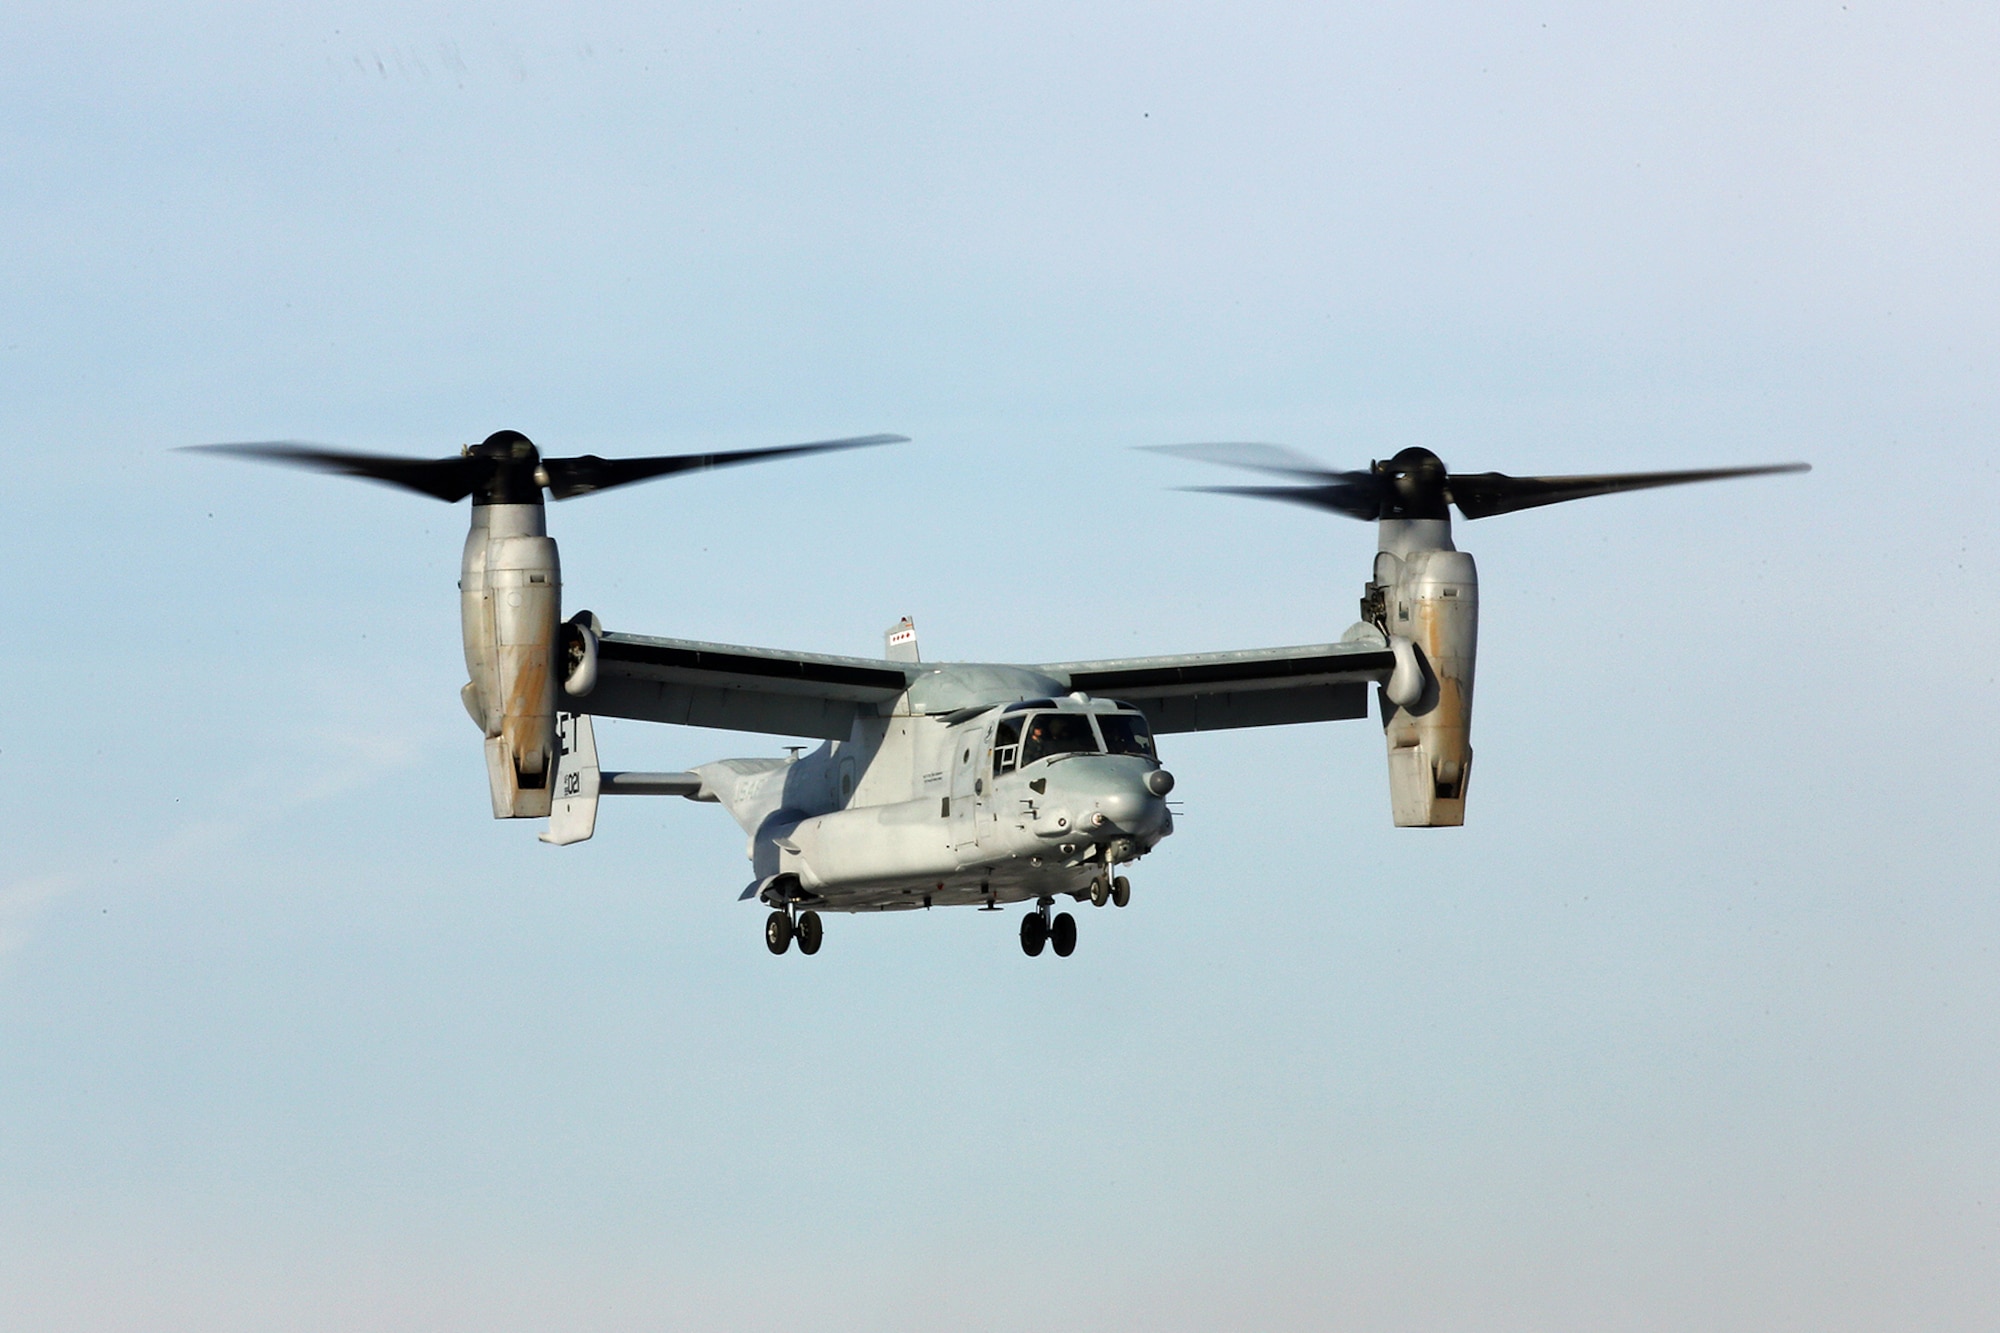 DAYTON, Ohio -- The Bell-Boeing CV-22B Osprey landed at the National Museum of the U.S. Air Force on Dec. 12, 2013. (U.S. Air Force photo by Don Popp)